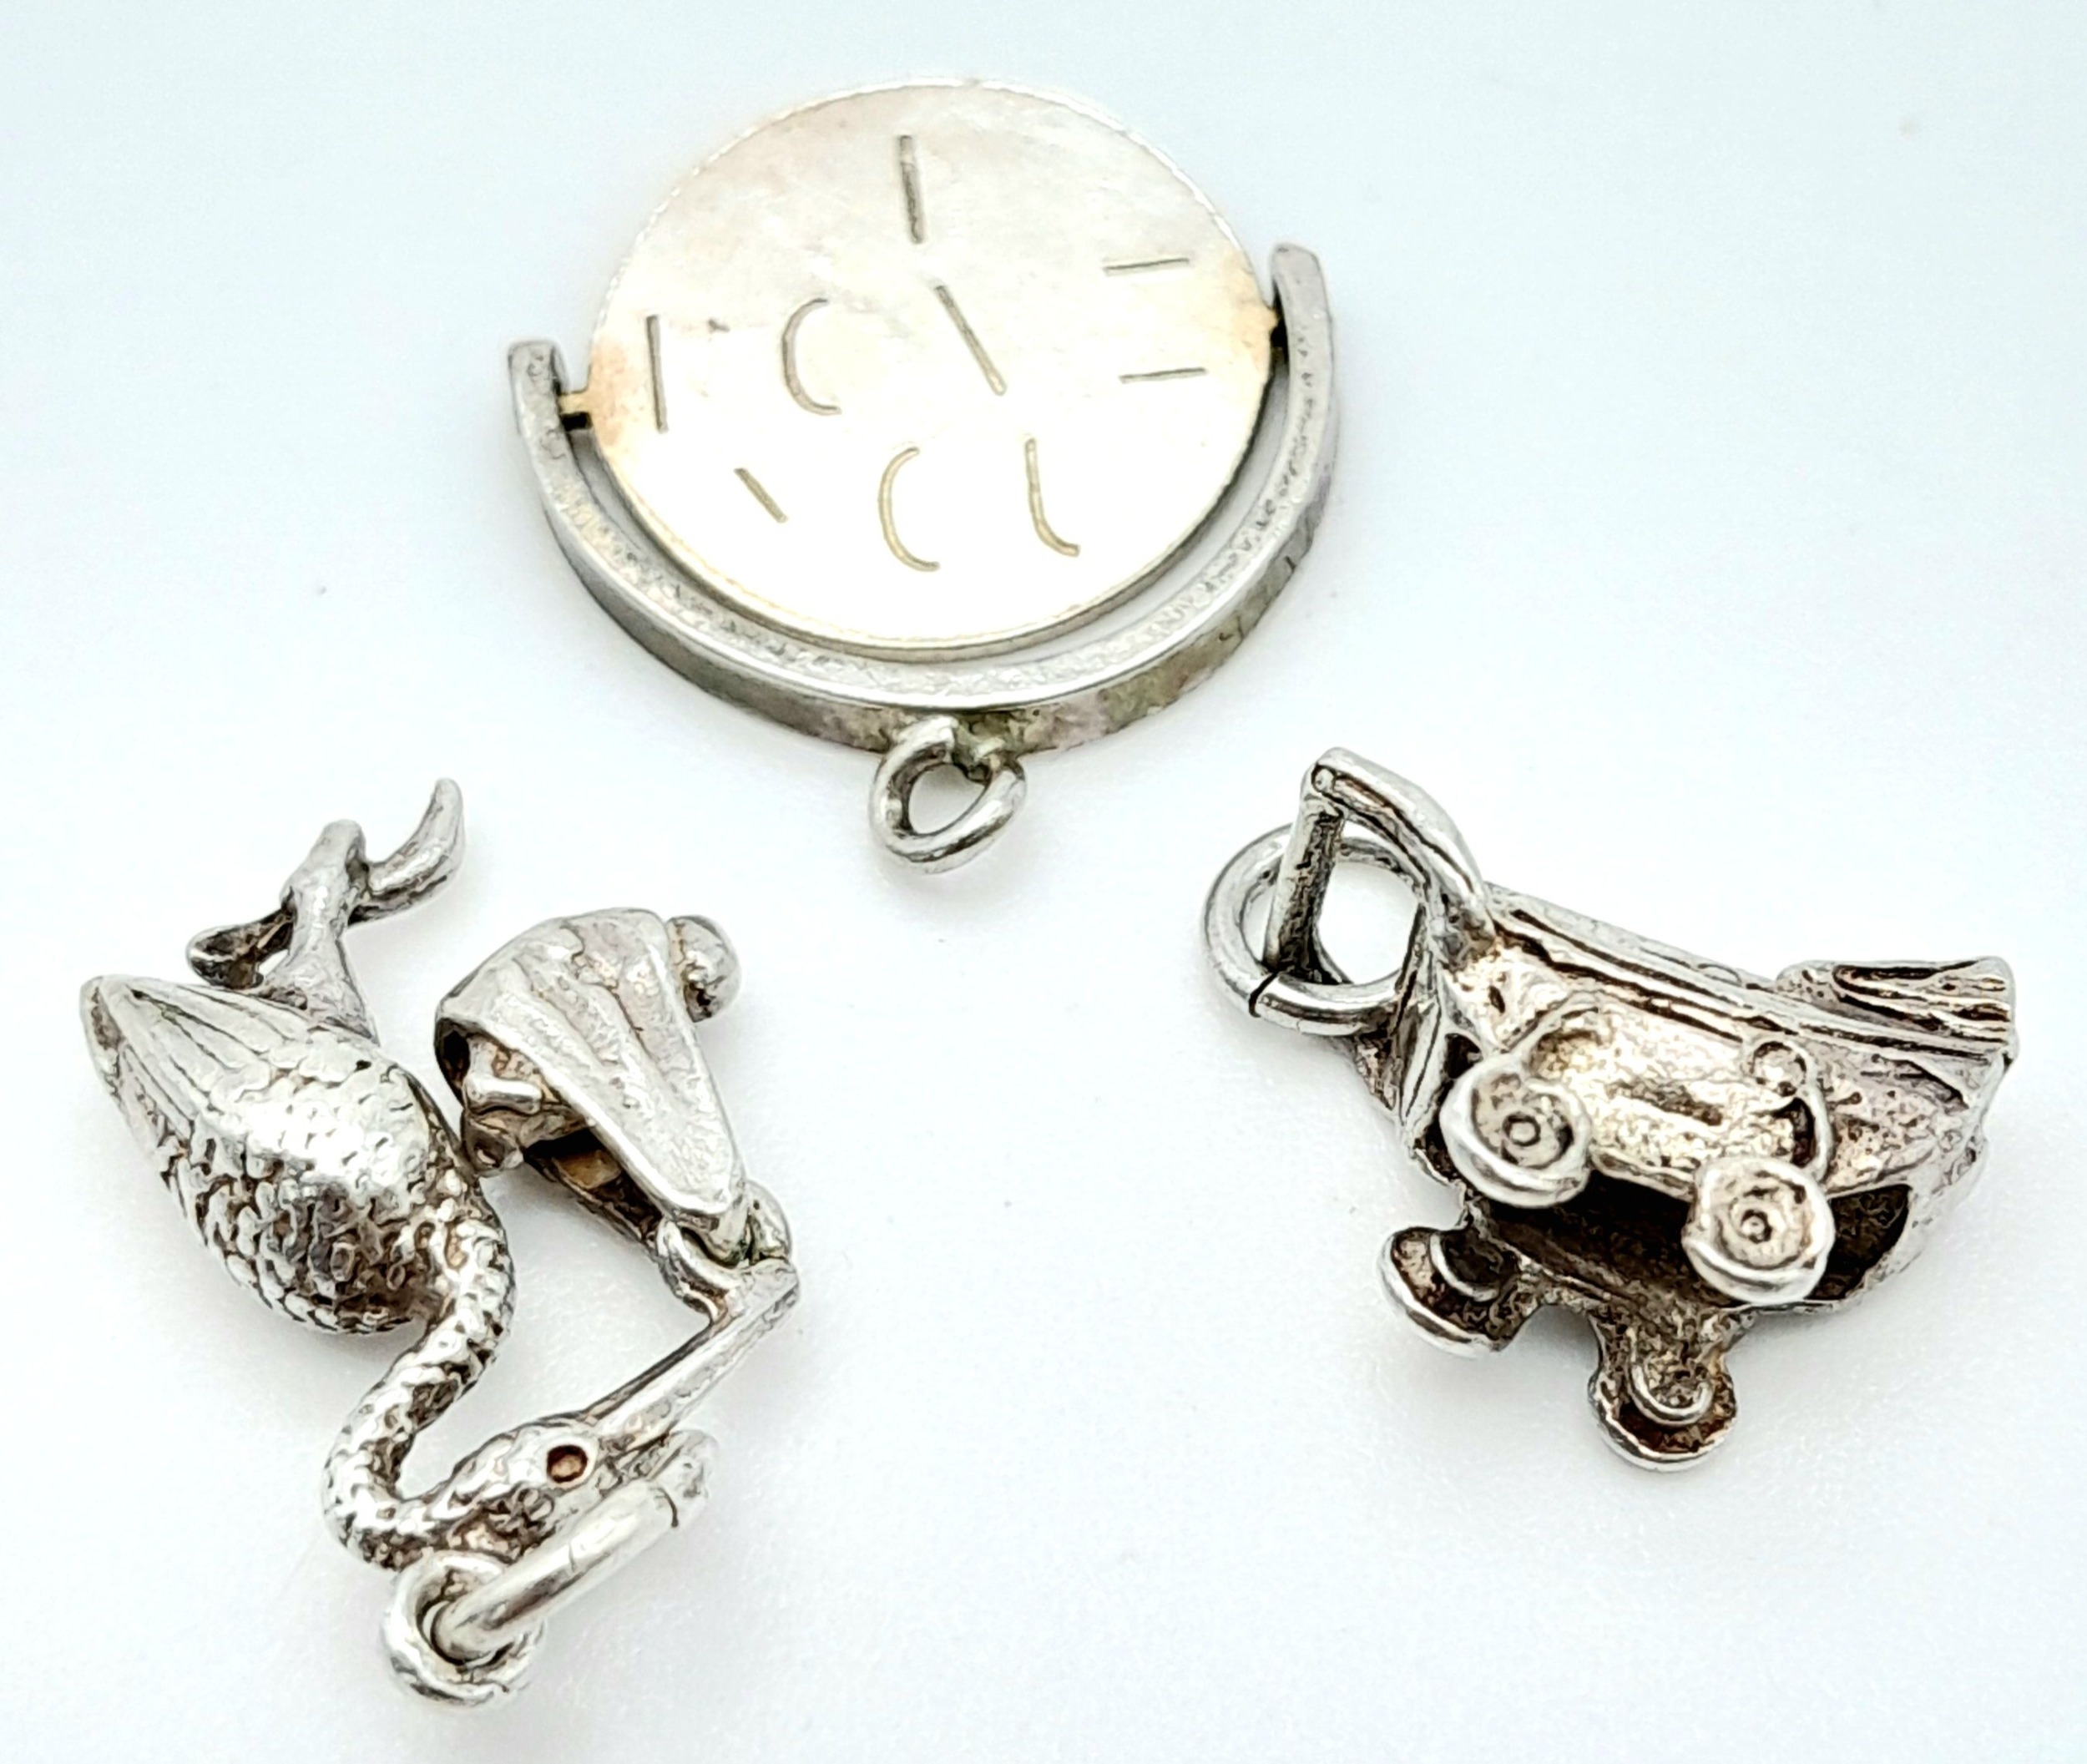 3 X STERLING SILVER NEW BABY THEMED CHARMS - PRAM, STALK CARRYING BABY, AND I LOVE YOU SPINNER. 4.4g - Image 2 of 3